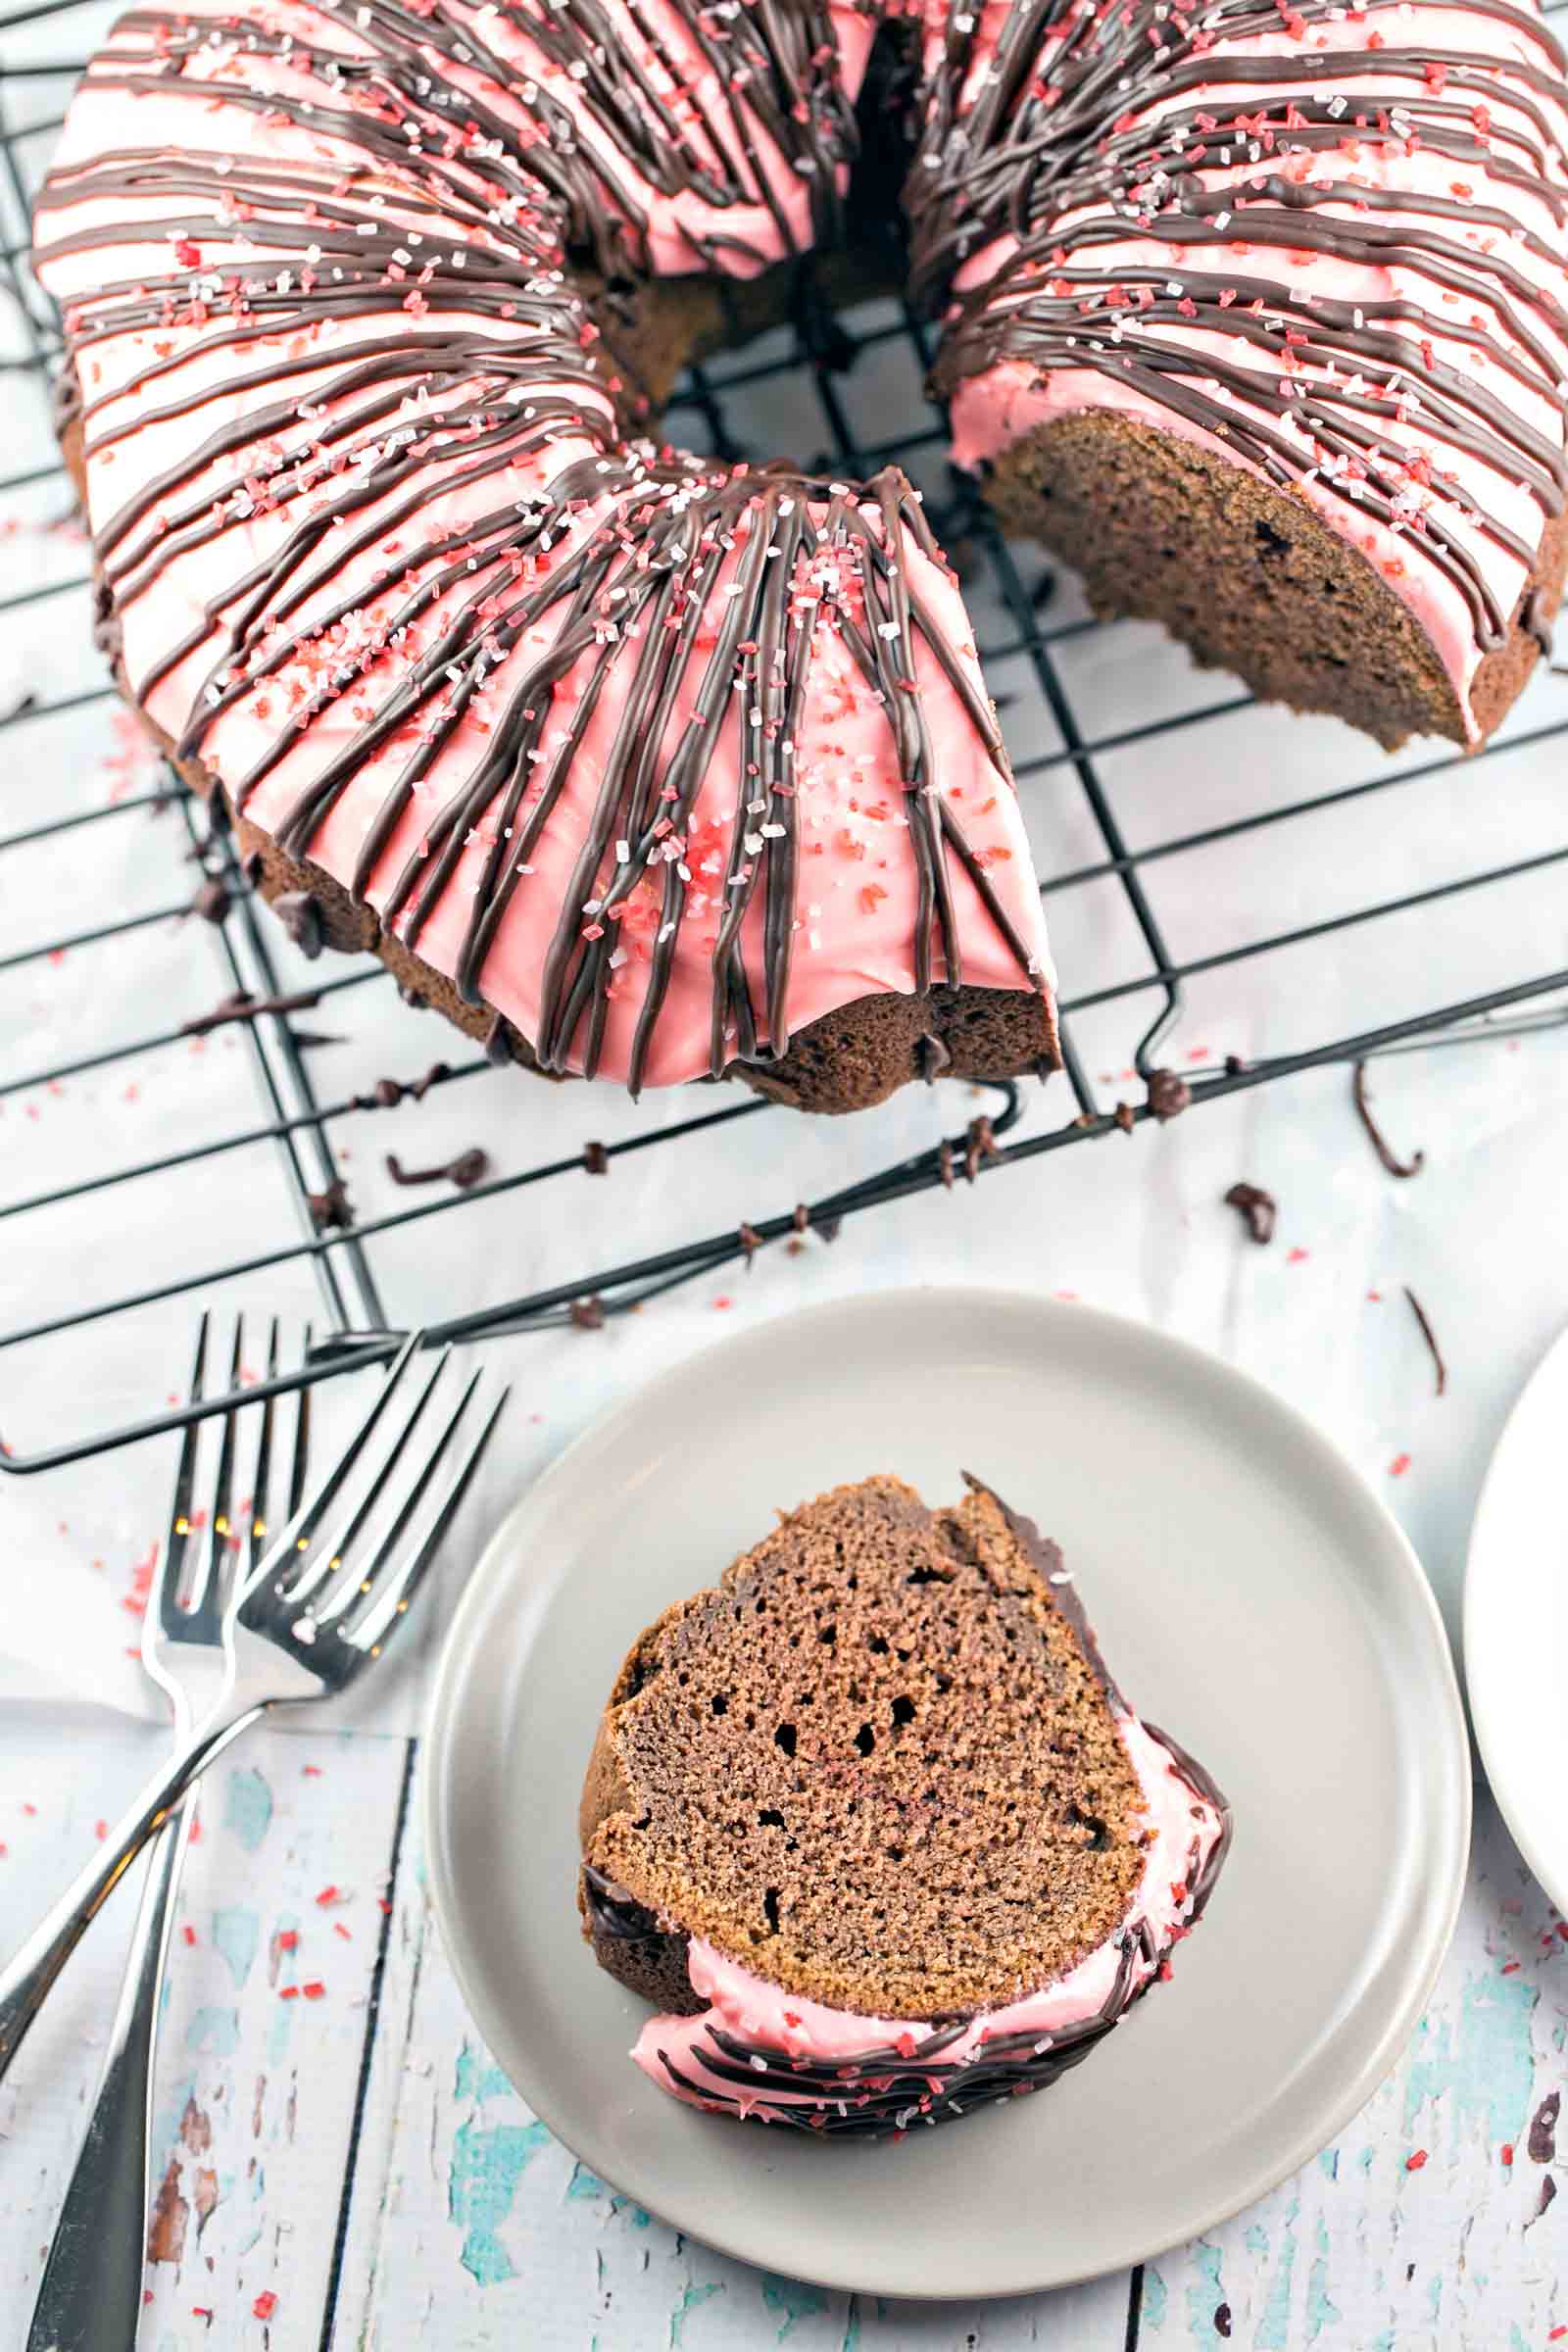 Peppermint Mocha Bundt Cake: rich chocolate cake, peppermint cream cheese frosting, and a chocolate ganache drizzle - this one-bowl mix by hand bunt cake is perfect for holiday entertaining. {Bunsen Burner Bakery}